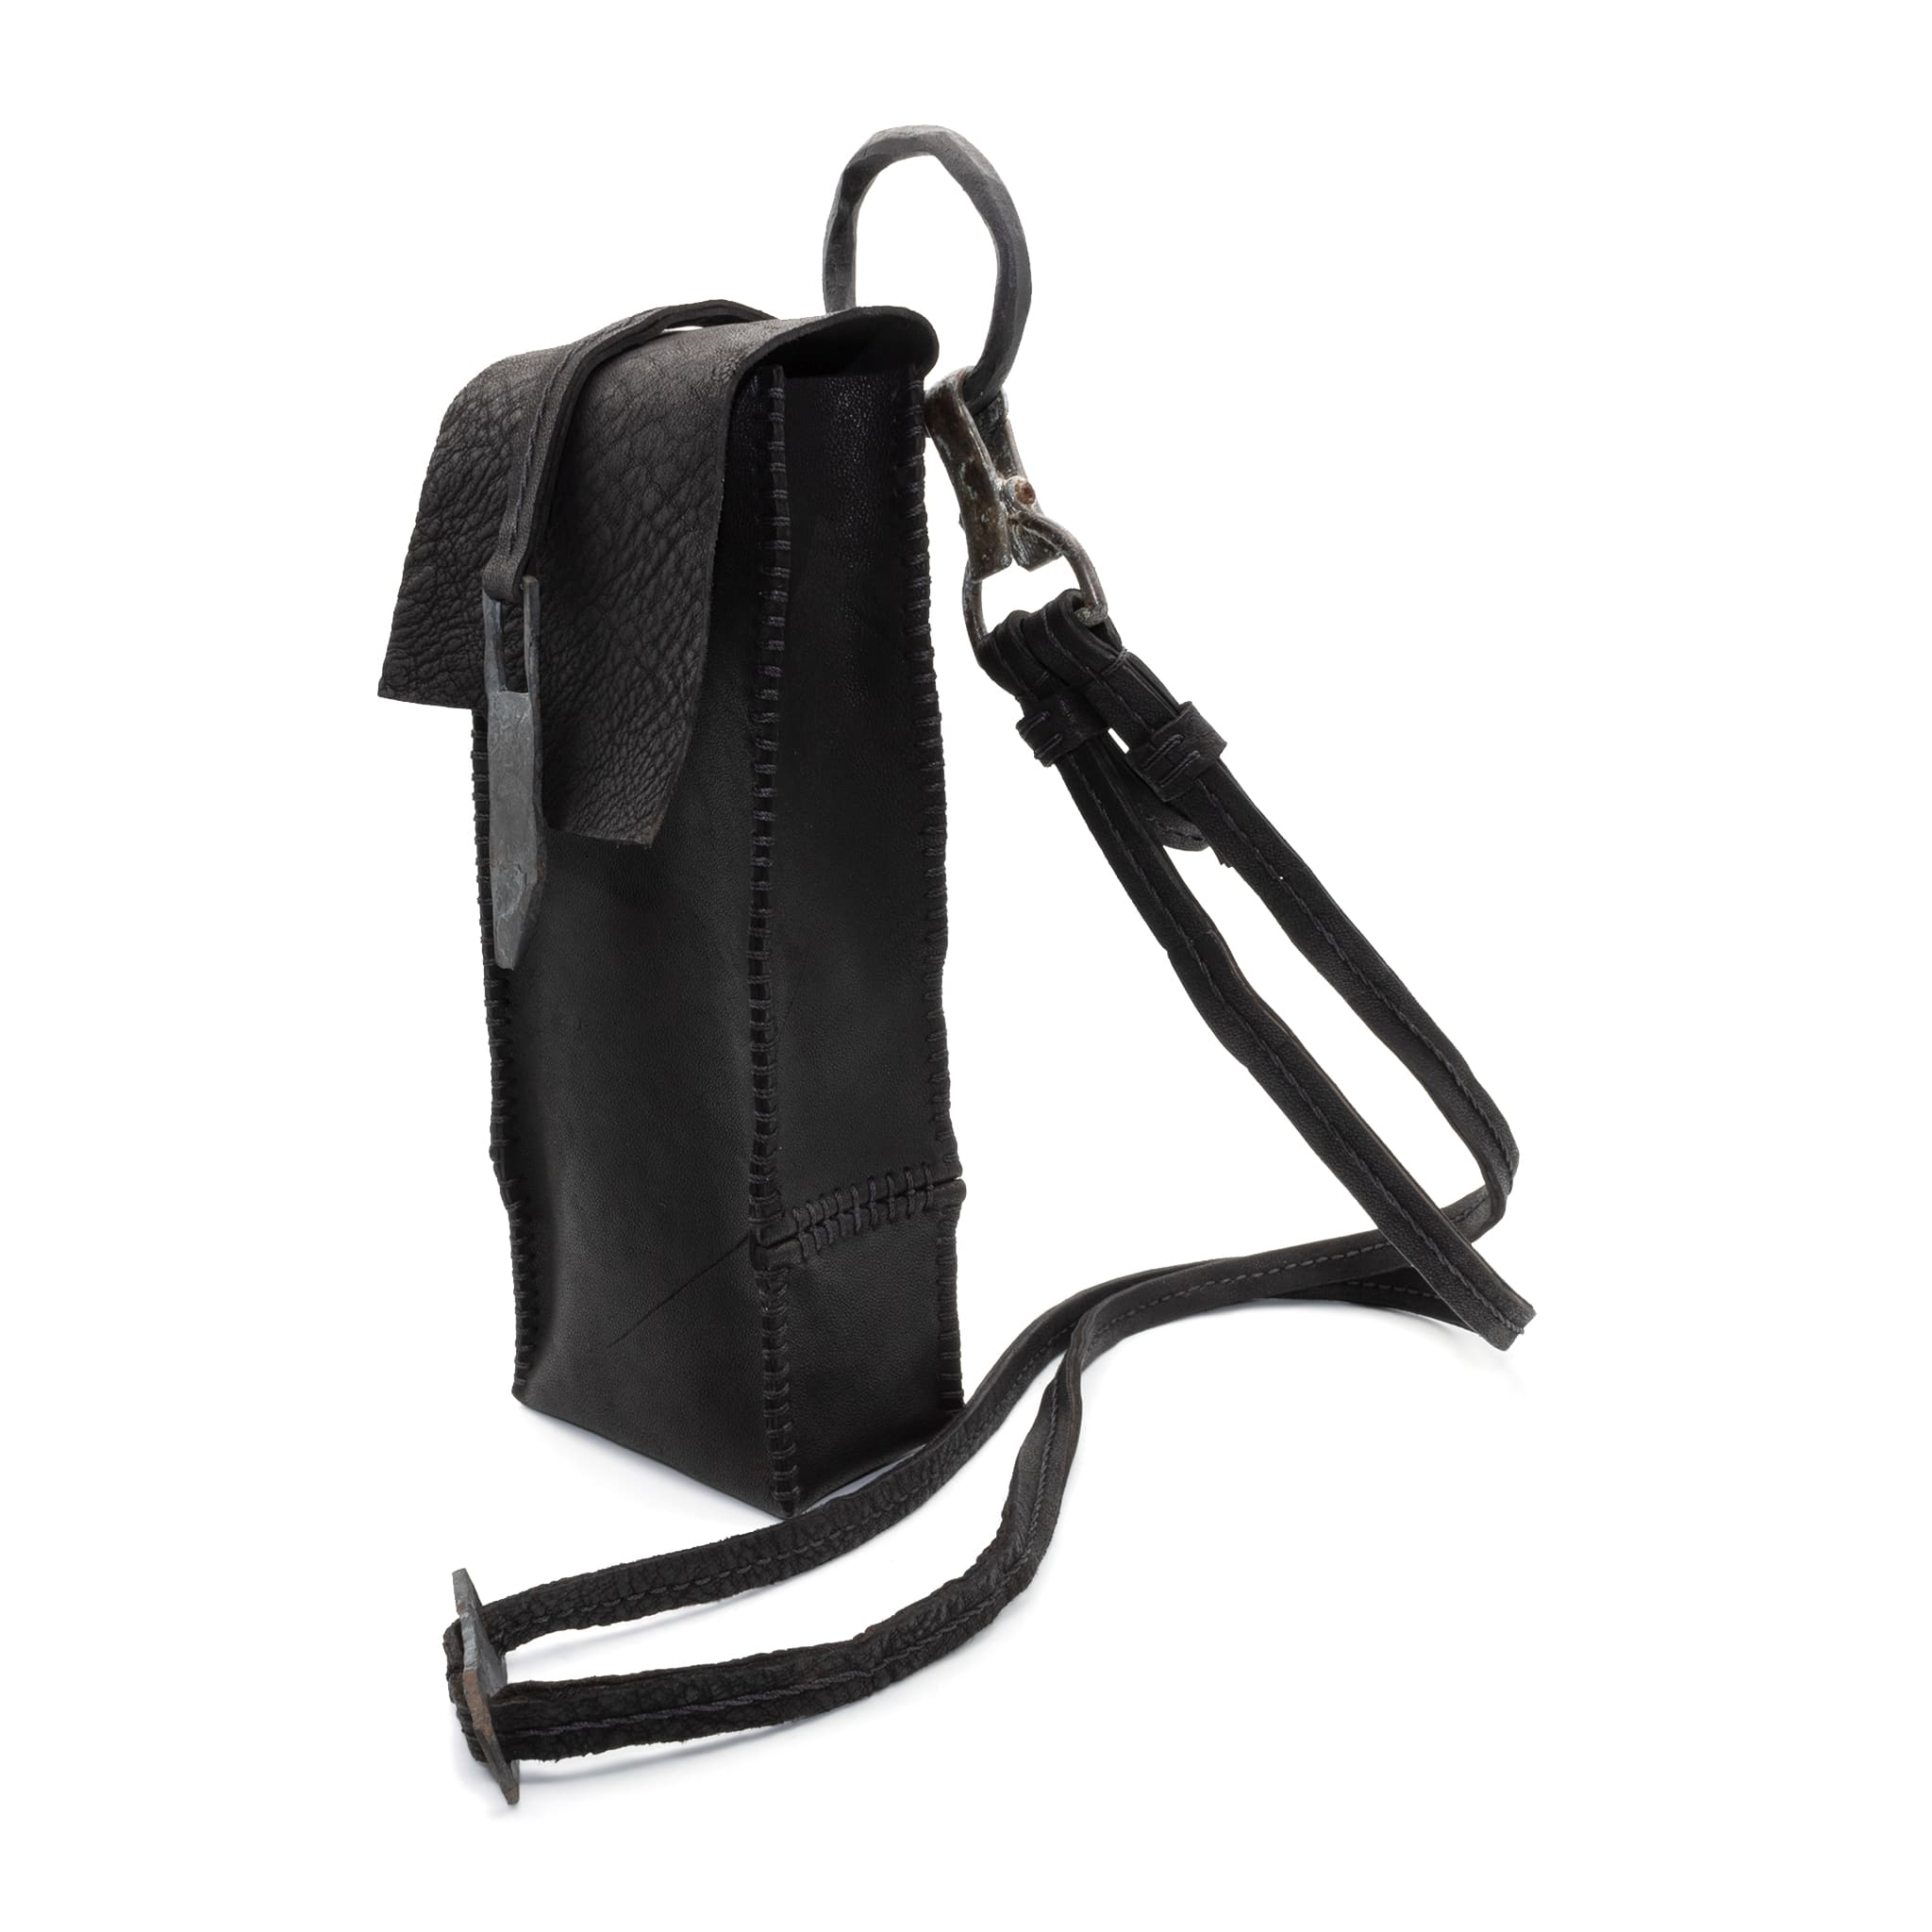 black  horse culatta leather phone pouch available online at atelierskn.com